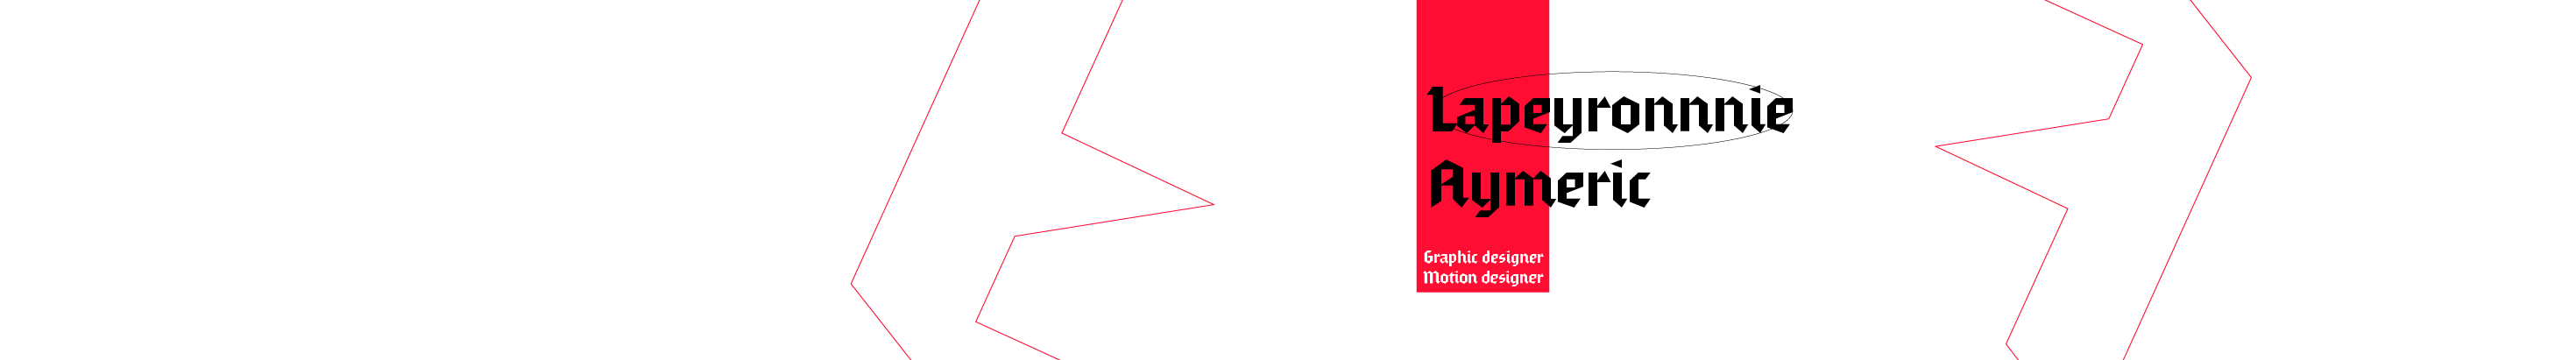 Aymeric Lapeyronnie's profile banner